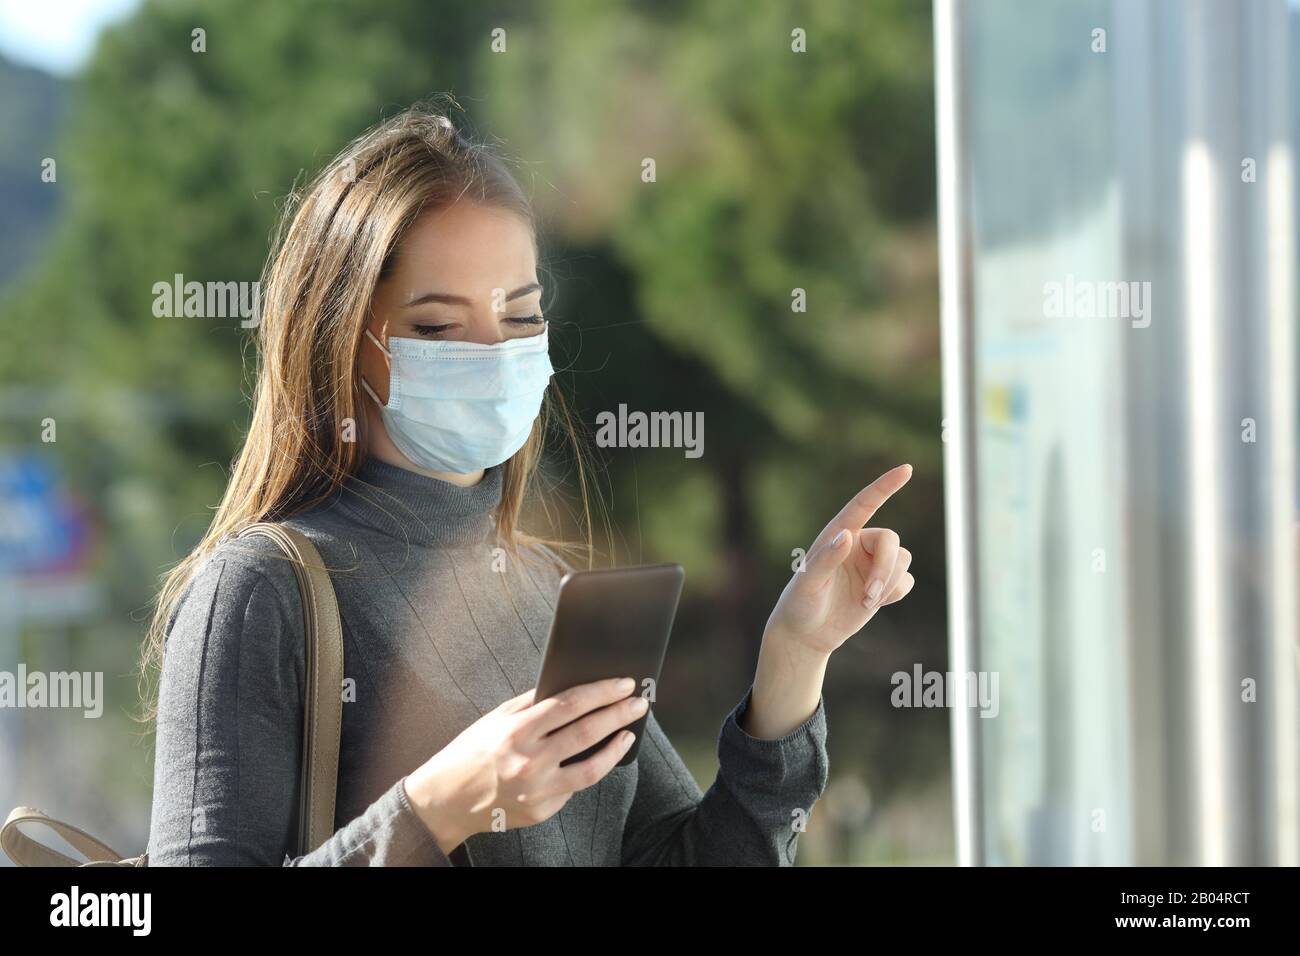 Commuter with a protective mask avoiding contagion checking bus schedule Stock Photo